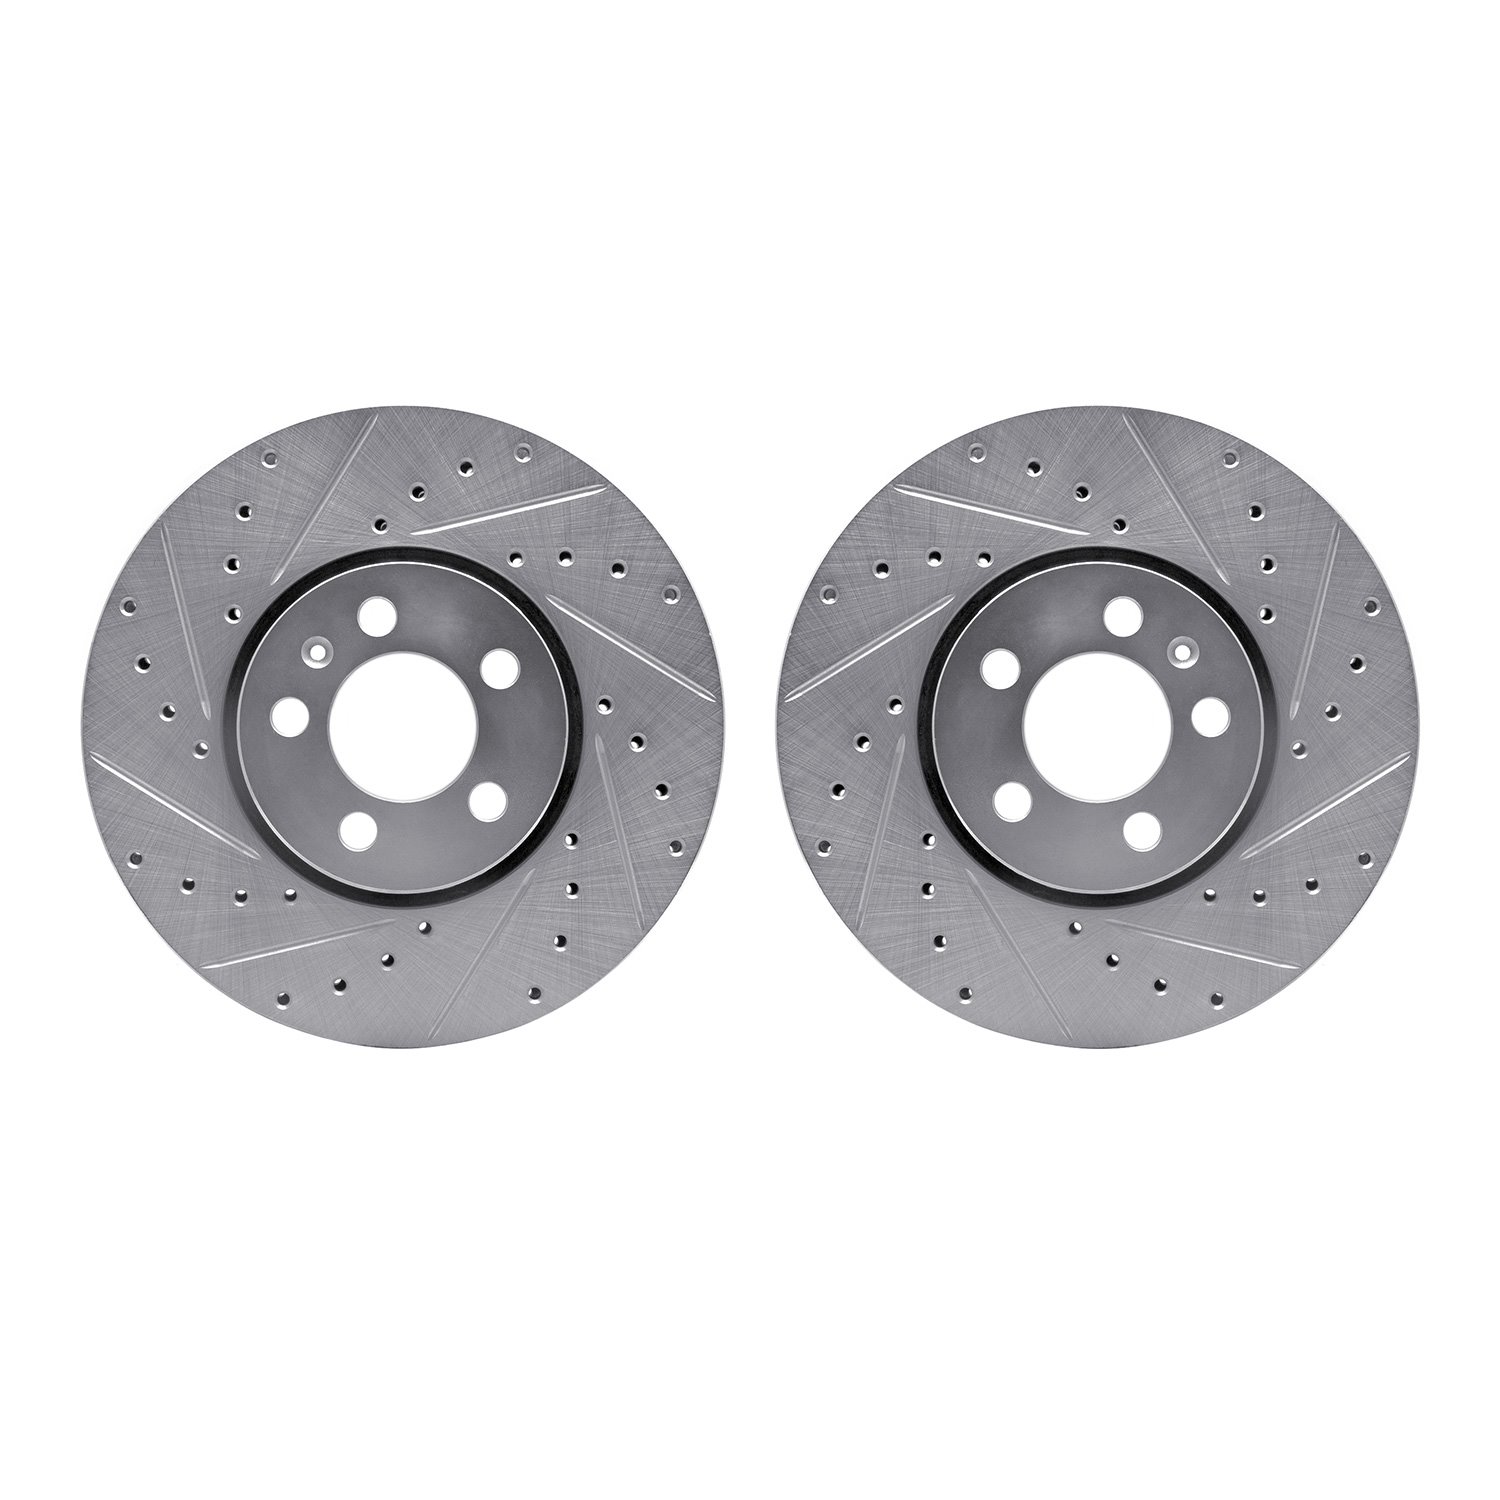 7002-74002 Drilled/Slotted Brake Rotors [Silver], 1998-2018 Audi/Volkswagen, Position: Front